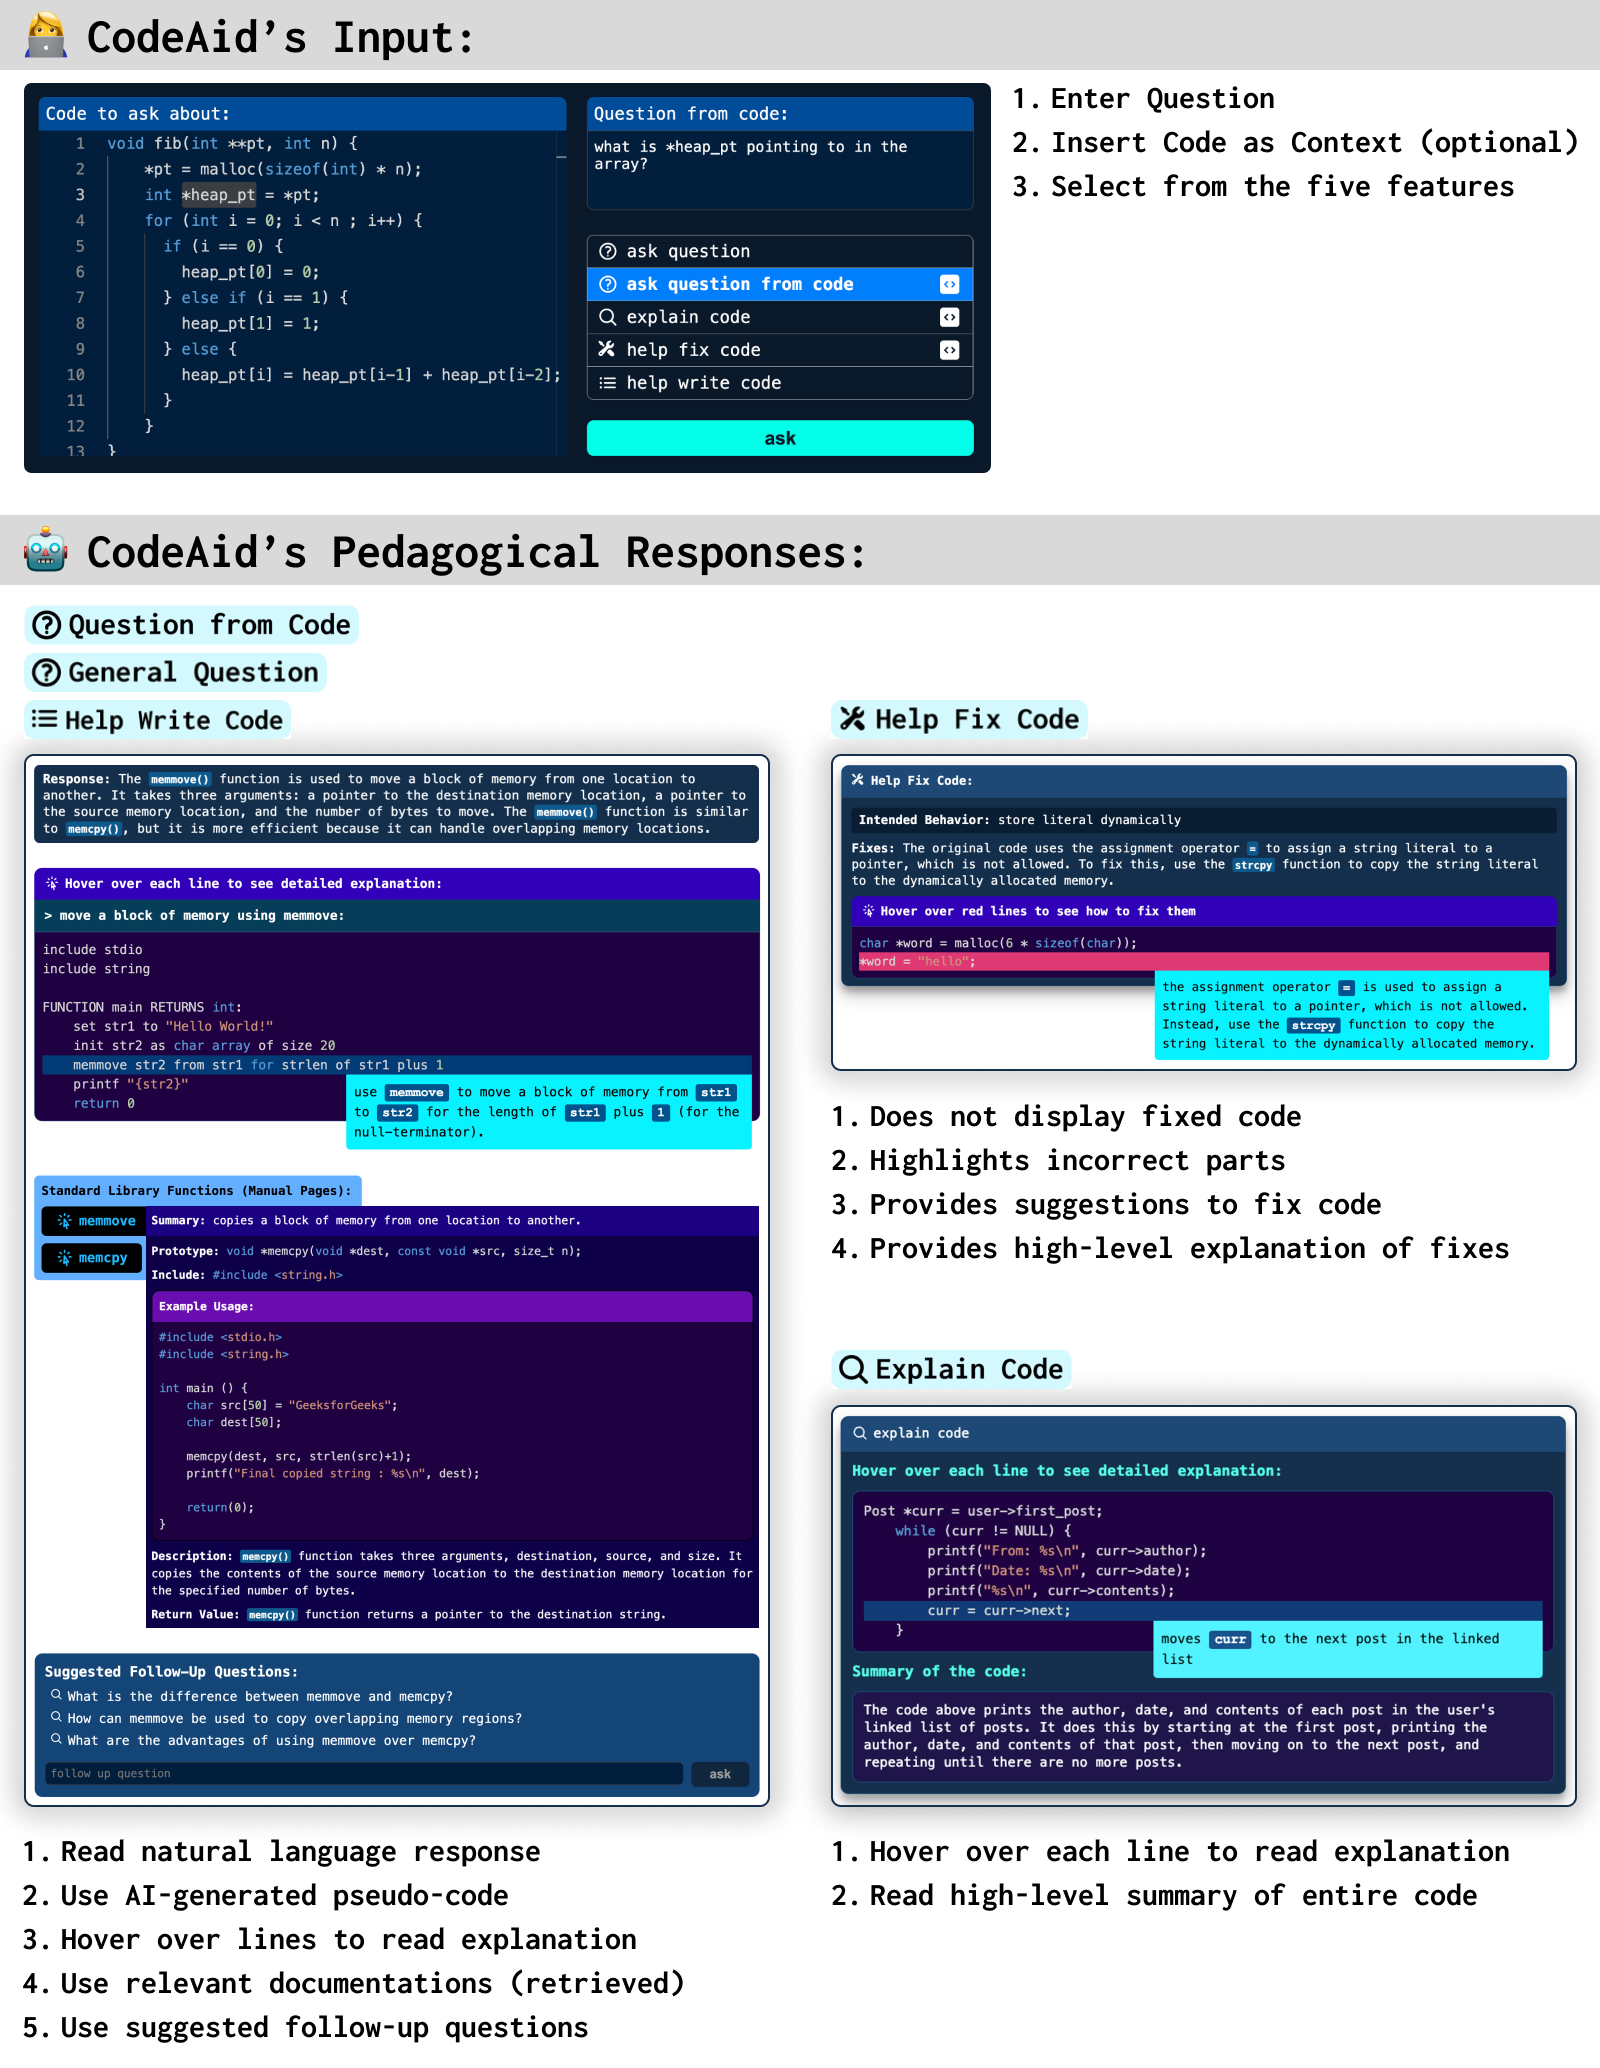 CodeAid allows students to ask five types of coding questions: General Question, Question From Code, Explain Code, Help Fix Code, and Help Write Code. In response, CodeAid uses LLMs to generate pedagogical answers that do not contain direct code solutions. When asked general questions or to generate code, it provides a natural language response with an interactive pseudo-code that allows students to hover over each line and understand what each line does. Responses also include relevant function documentations retrieved from a database to ensure factual accuracy and approved by course educator. When asked to help fix provided incorrect code, CodeAid does not display the fixed code. Instead, it highlights incorrect parts of the students' code with suggested fixes.